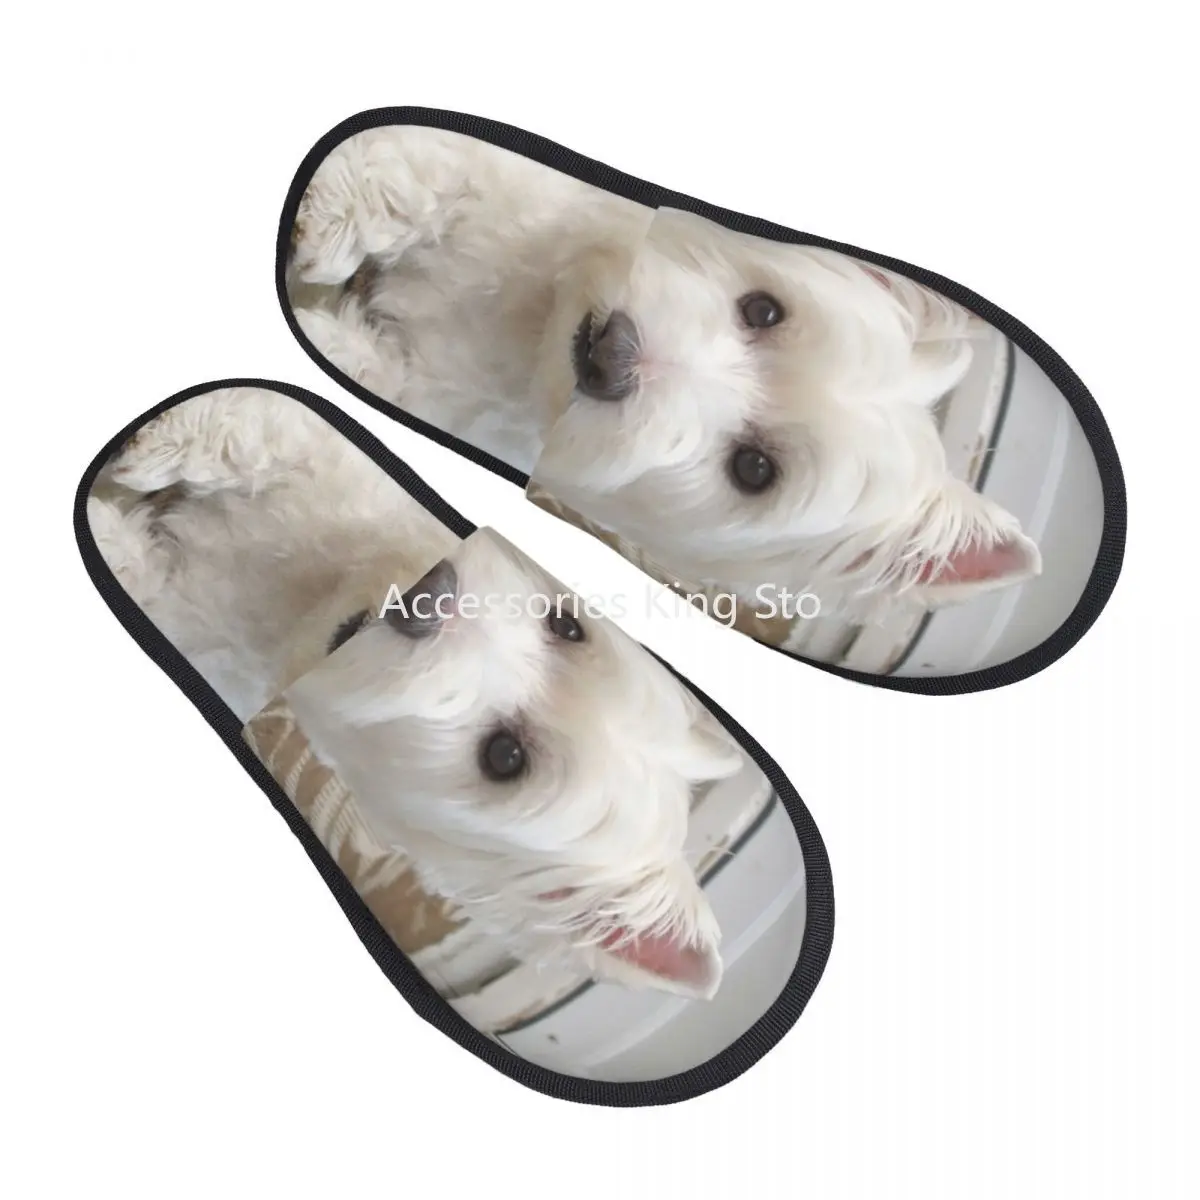 

Custom Print West Highland White Terrier House Slippers Cozy Warm Pet Westie Dog Memory Foam Fluffy Slipper Indoor Outdoor Shoes